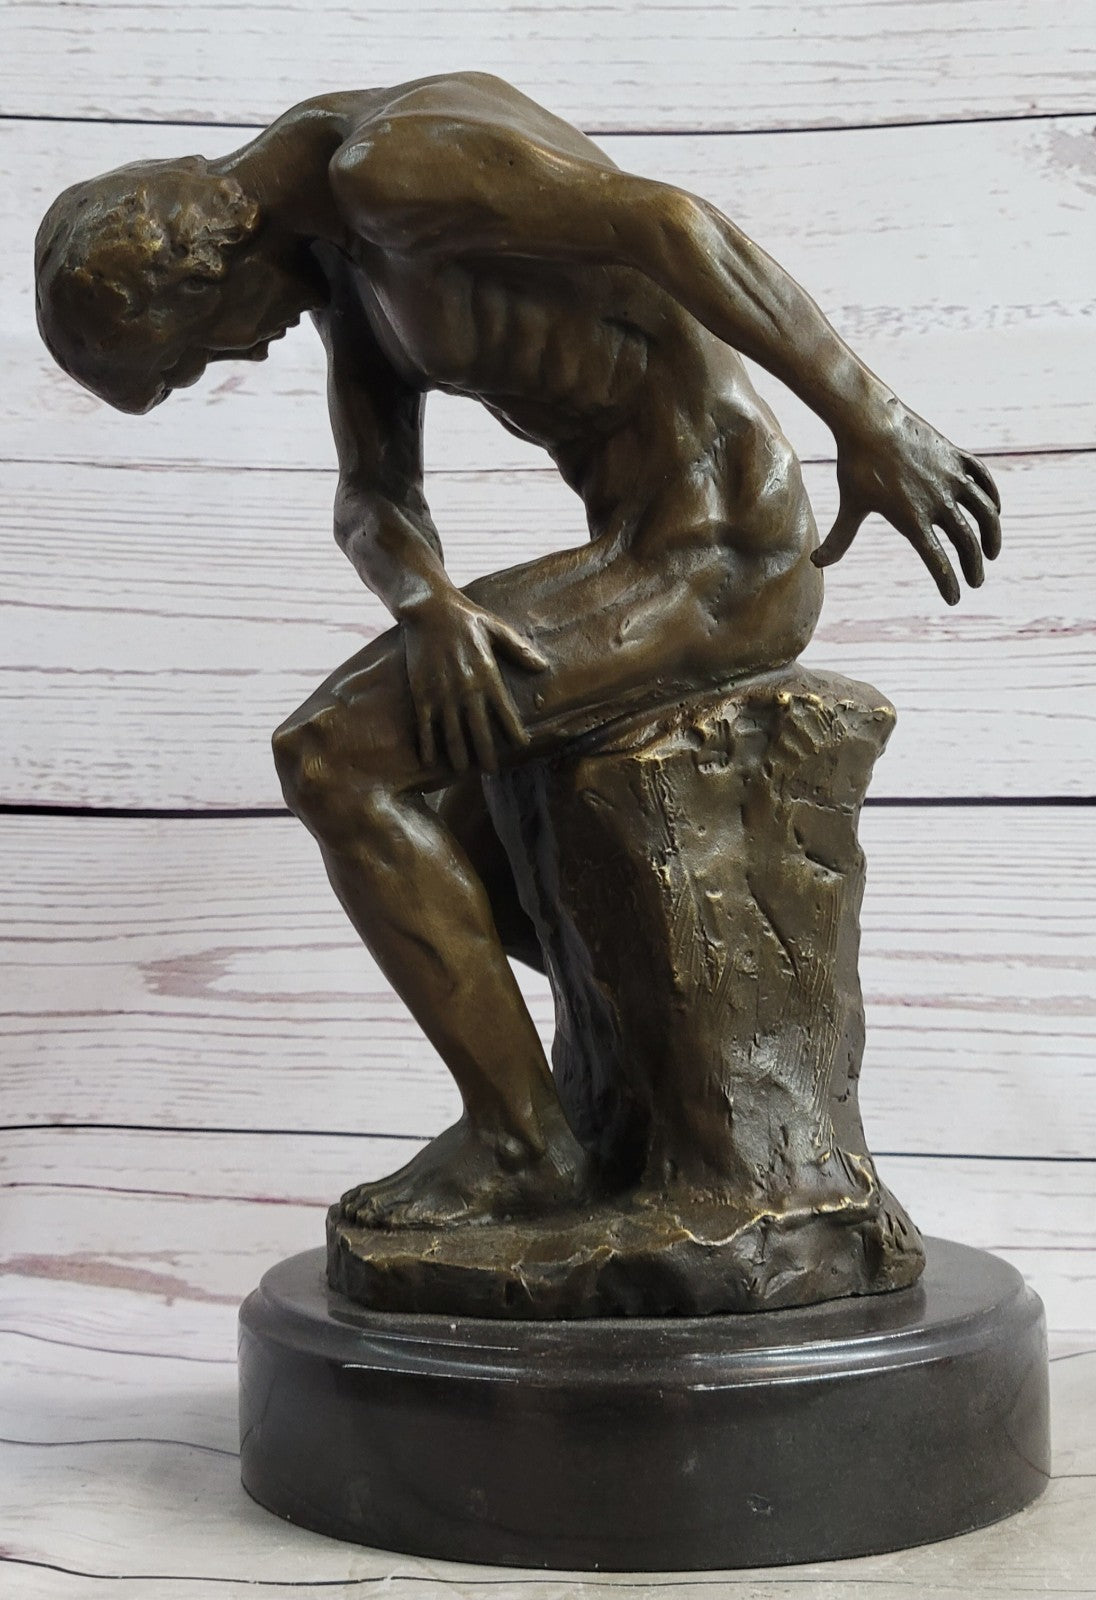 Handcrafted bronze sculpture SALE Male Erotic Sensual Nude Rodin Signed Large